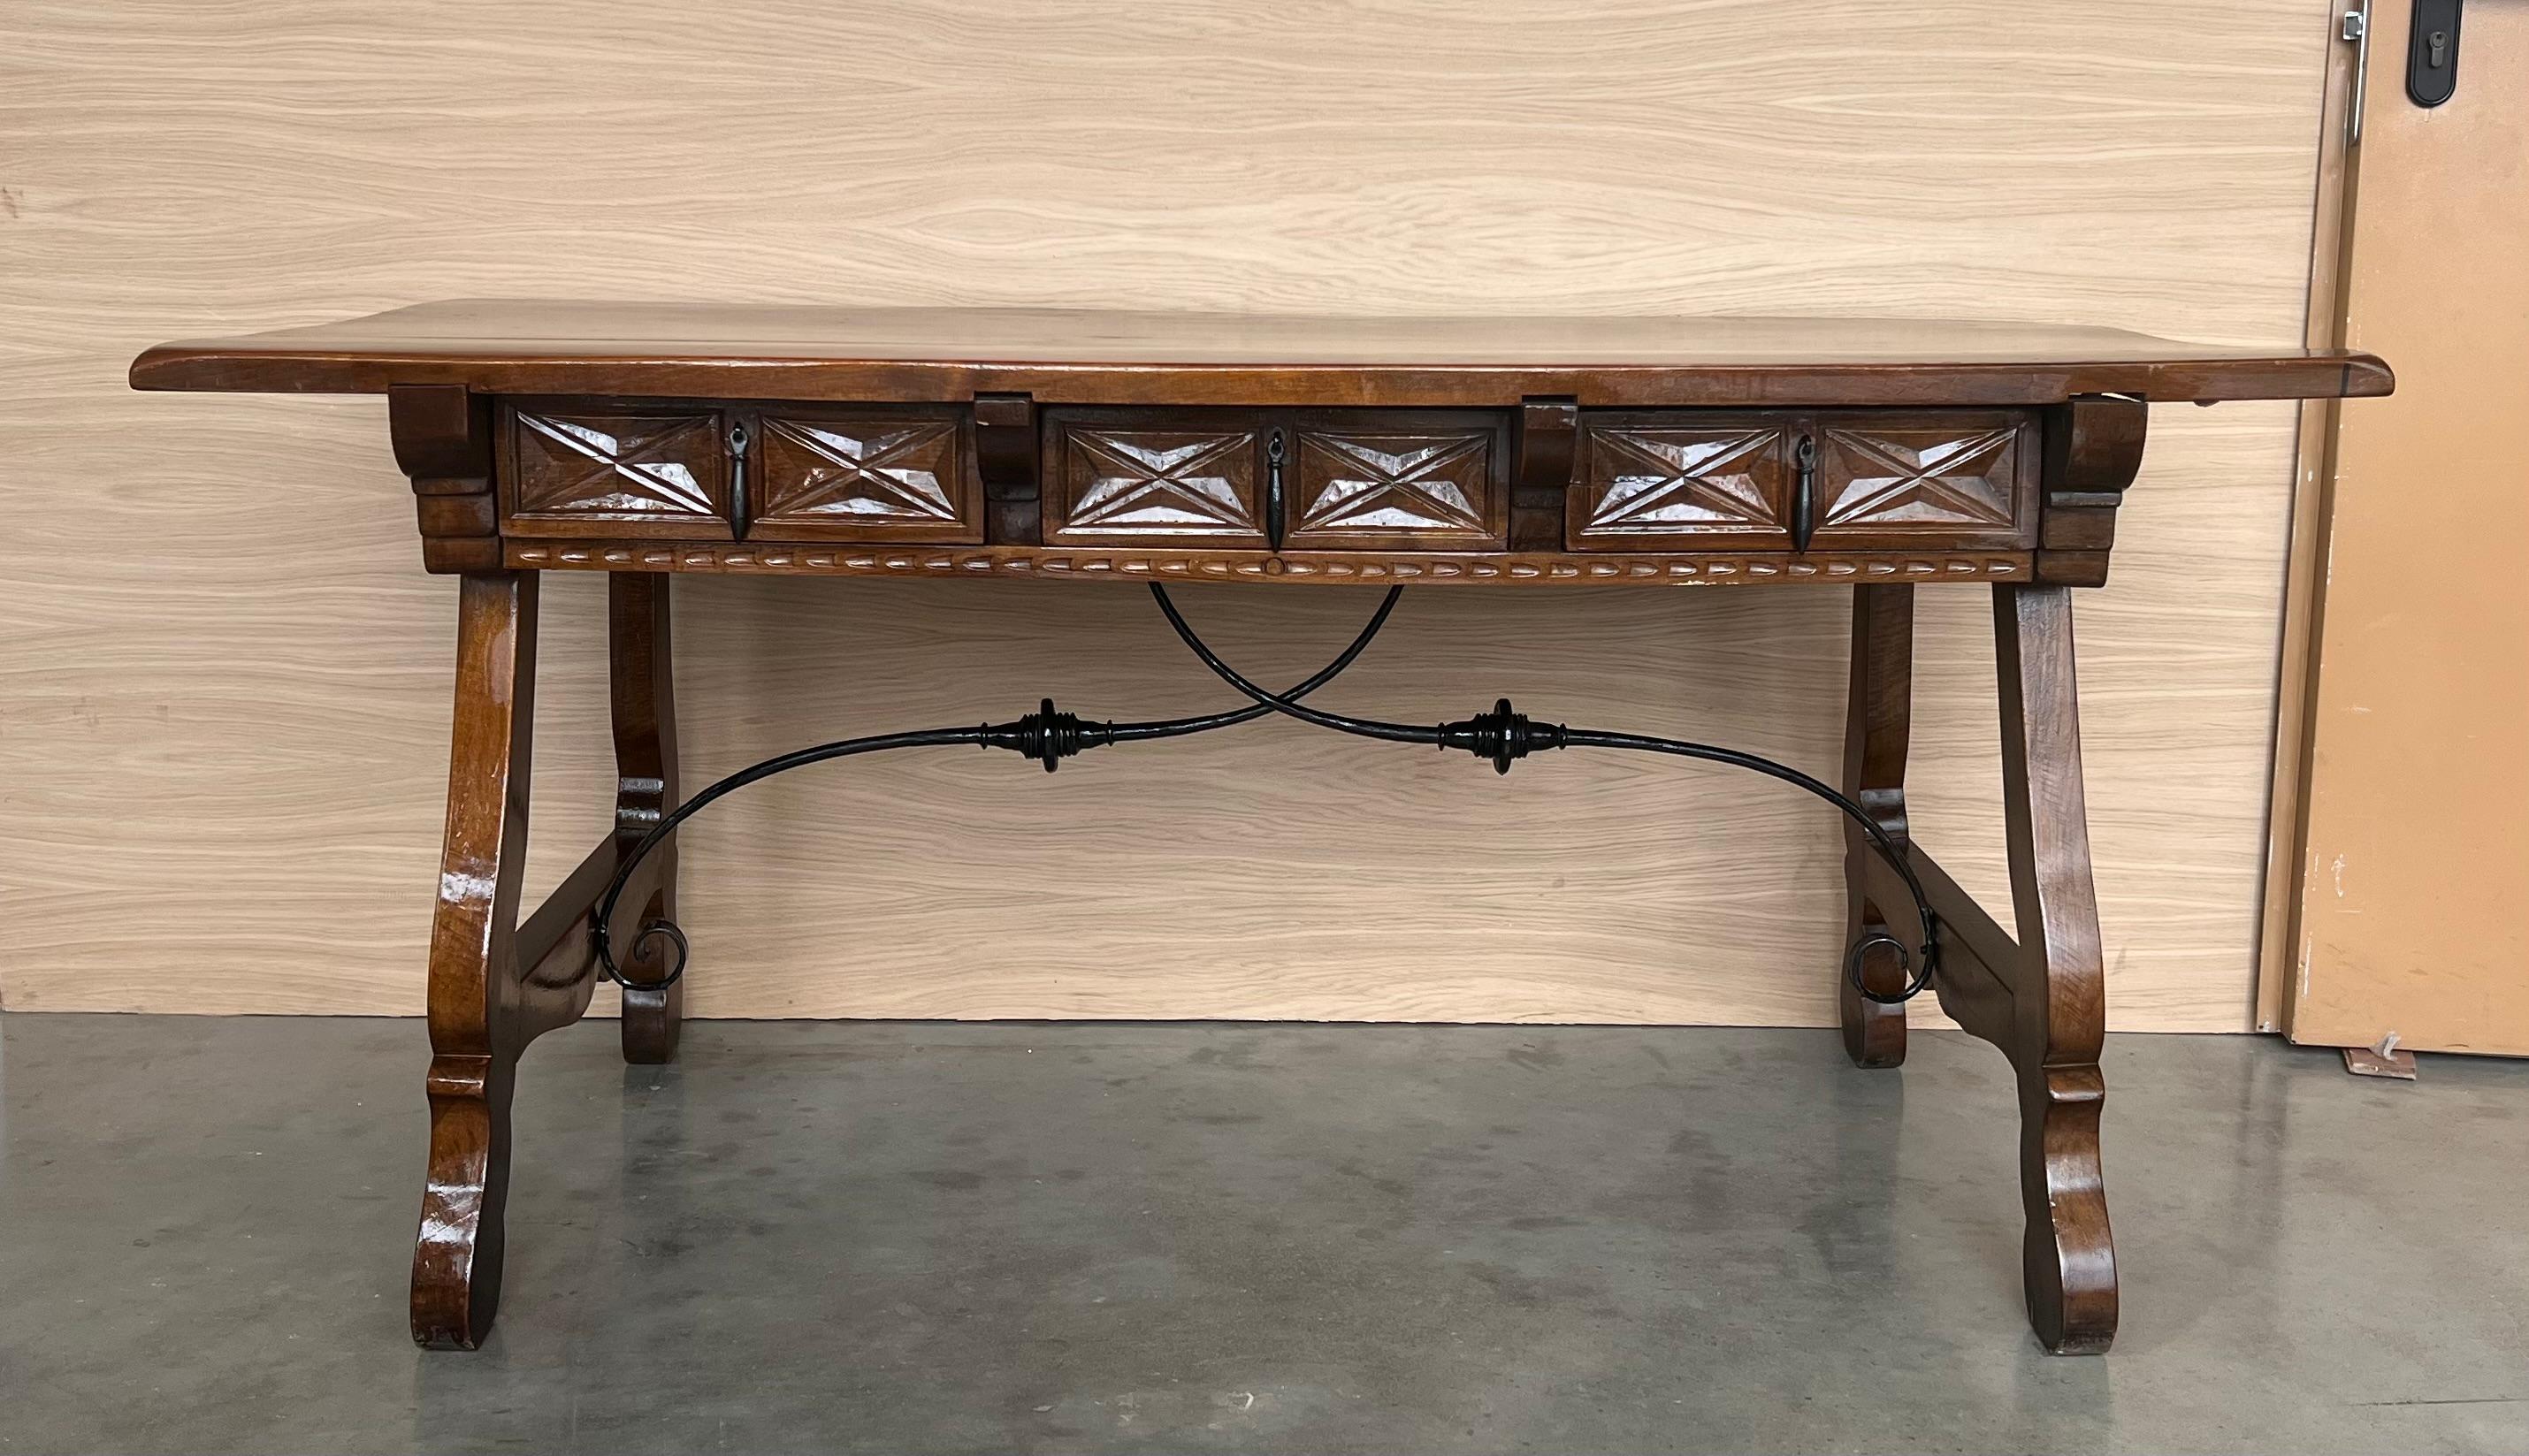 20th Century Spanish baroque desk, or writing table made of solid walnut with lyre legs joined by wrought iron stretchers. Three drawers with original iron drawer pulls. The top is made from a single plank of walnut and is slightly warped. Beautiful